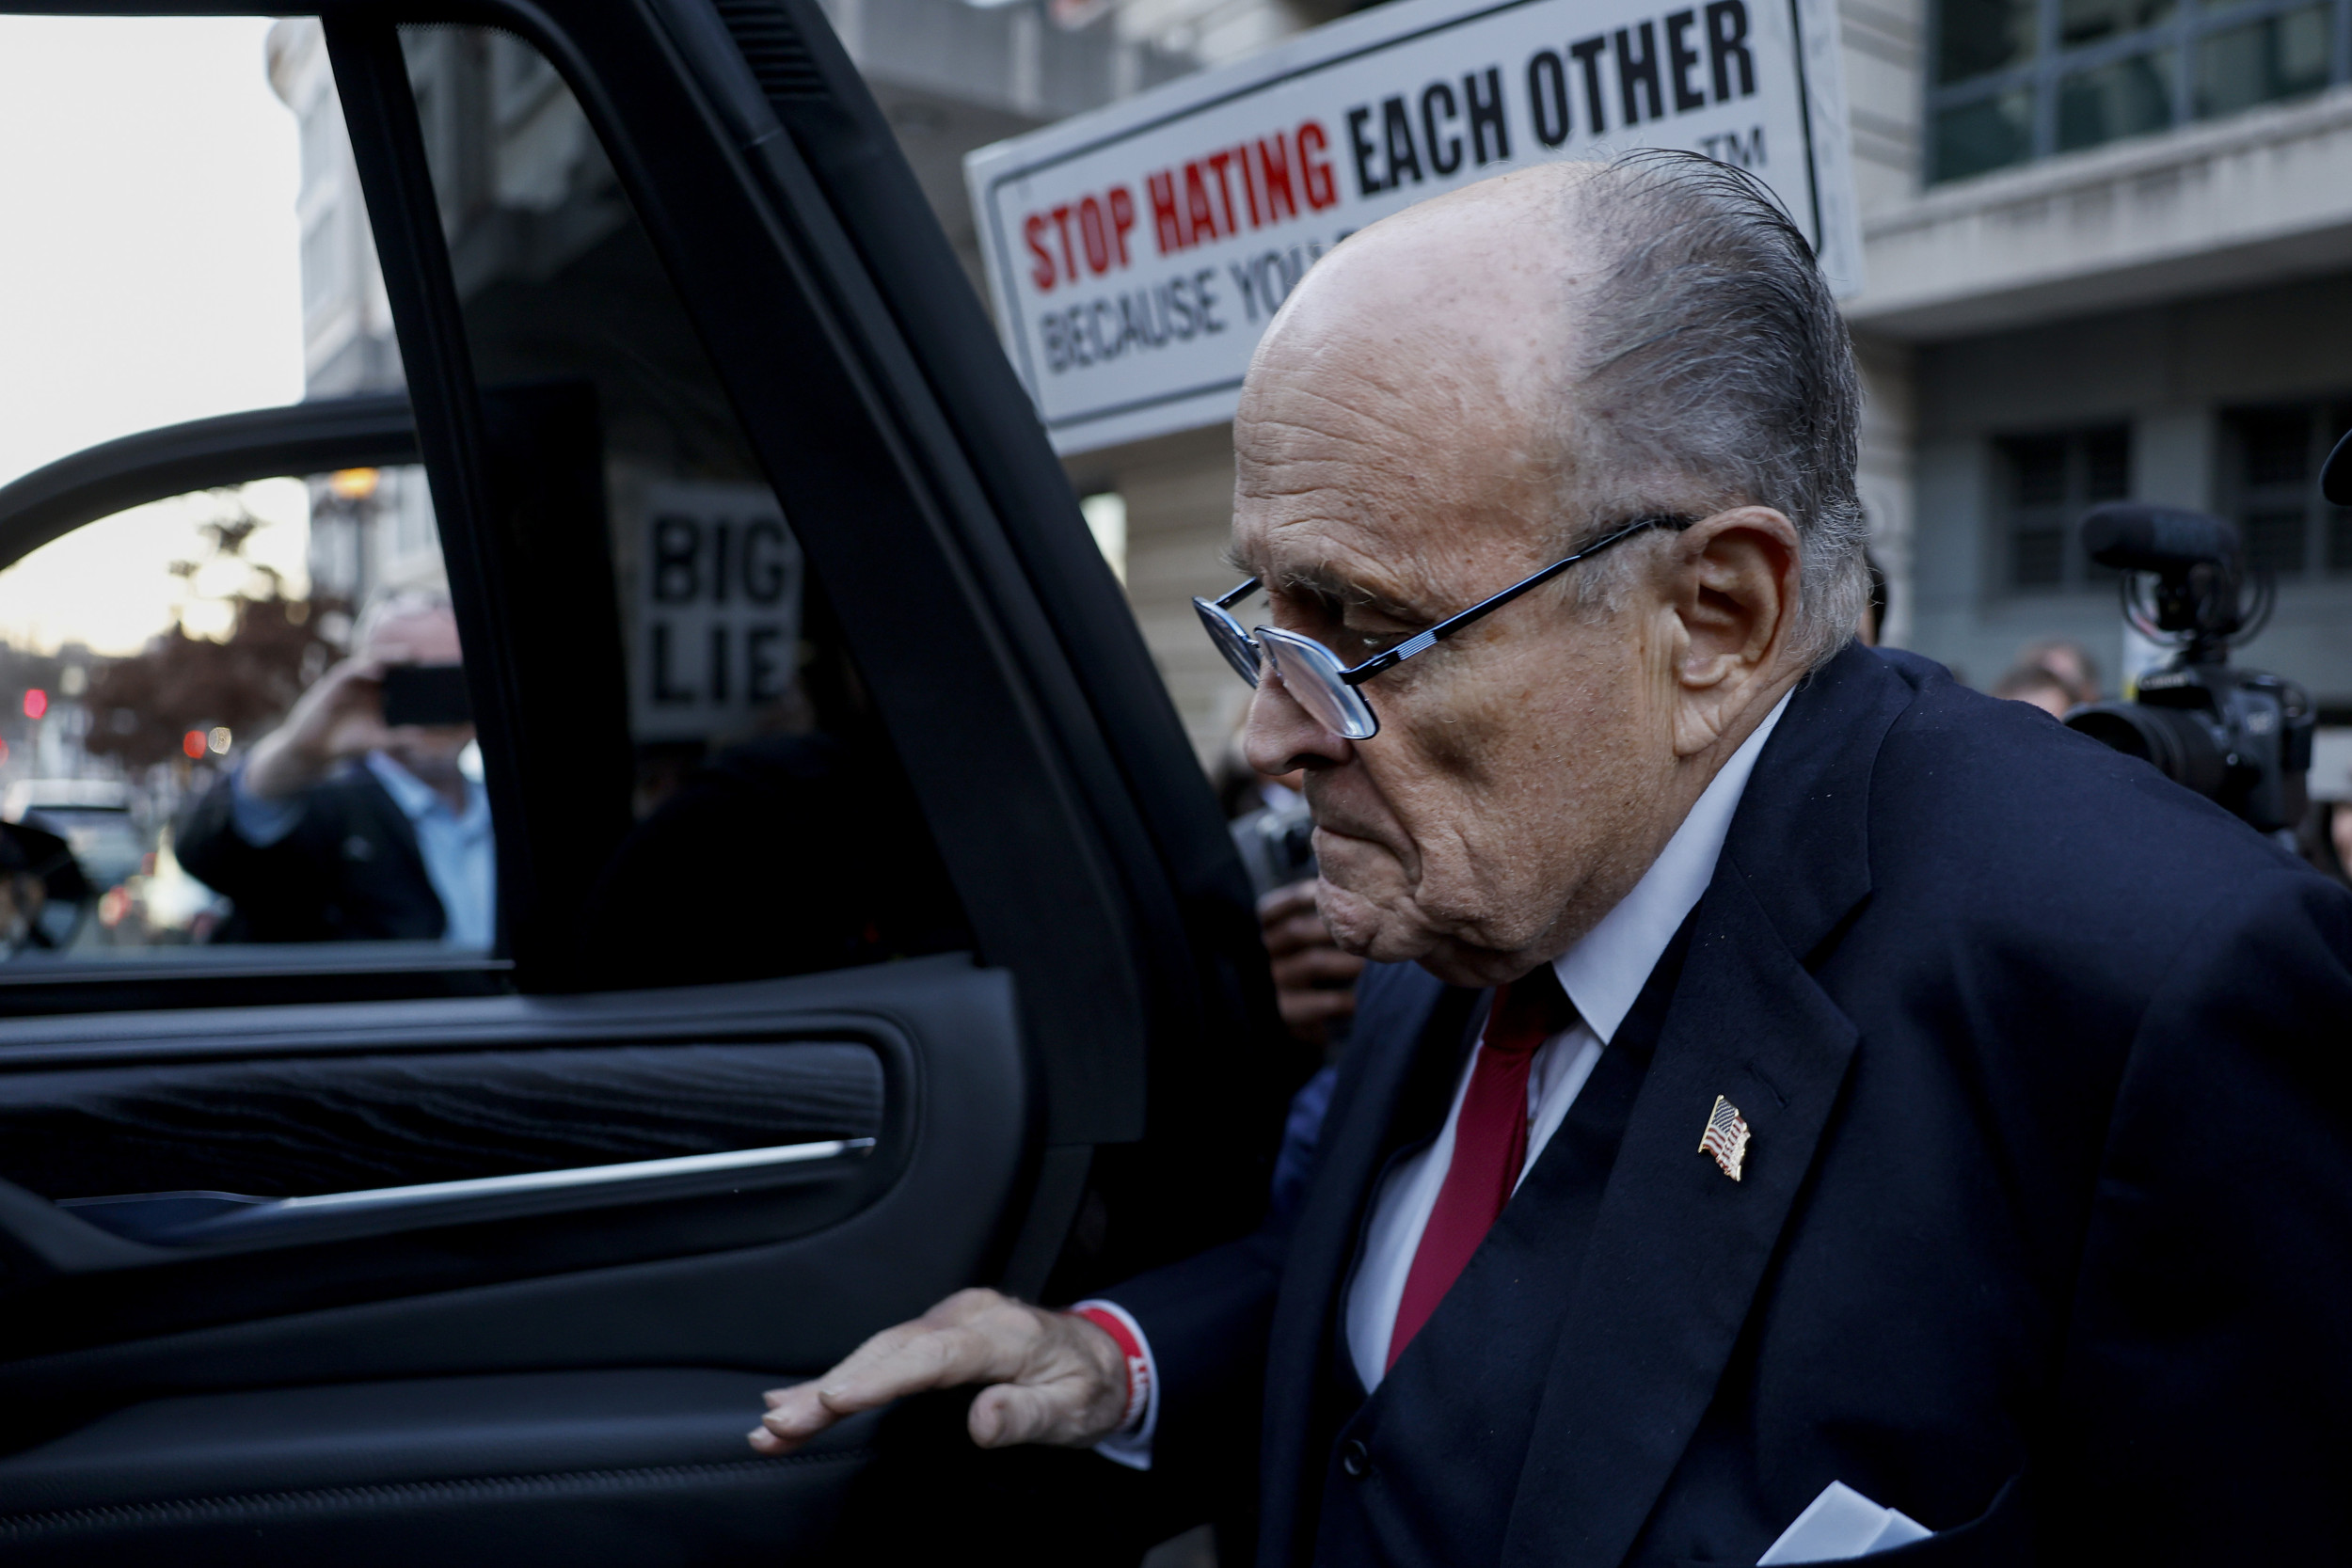 rudy giuliani's credit card reveals 'unauthorized payments': court filing